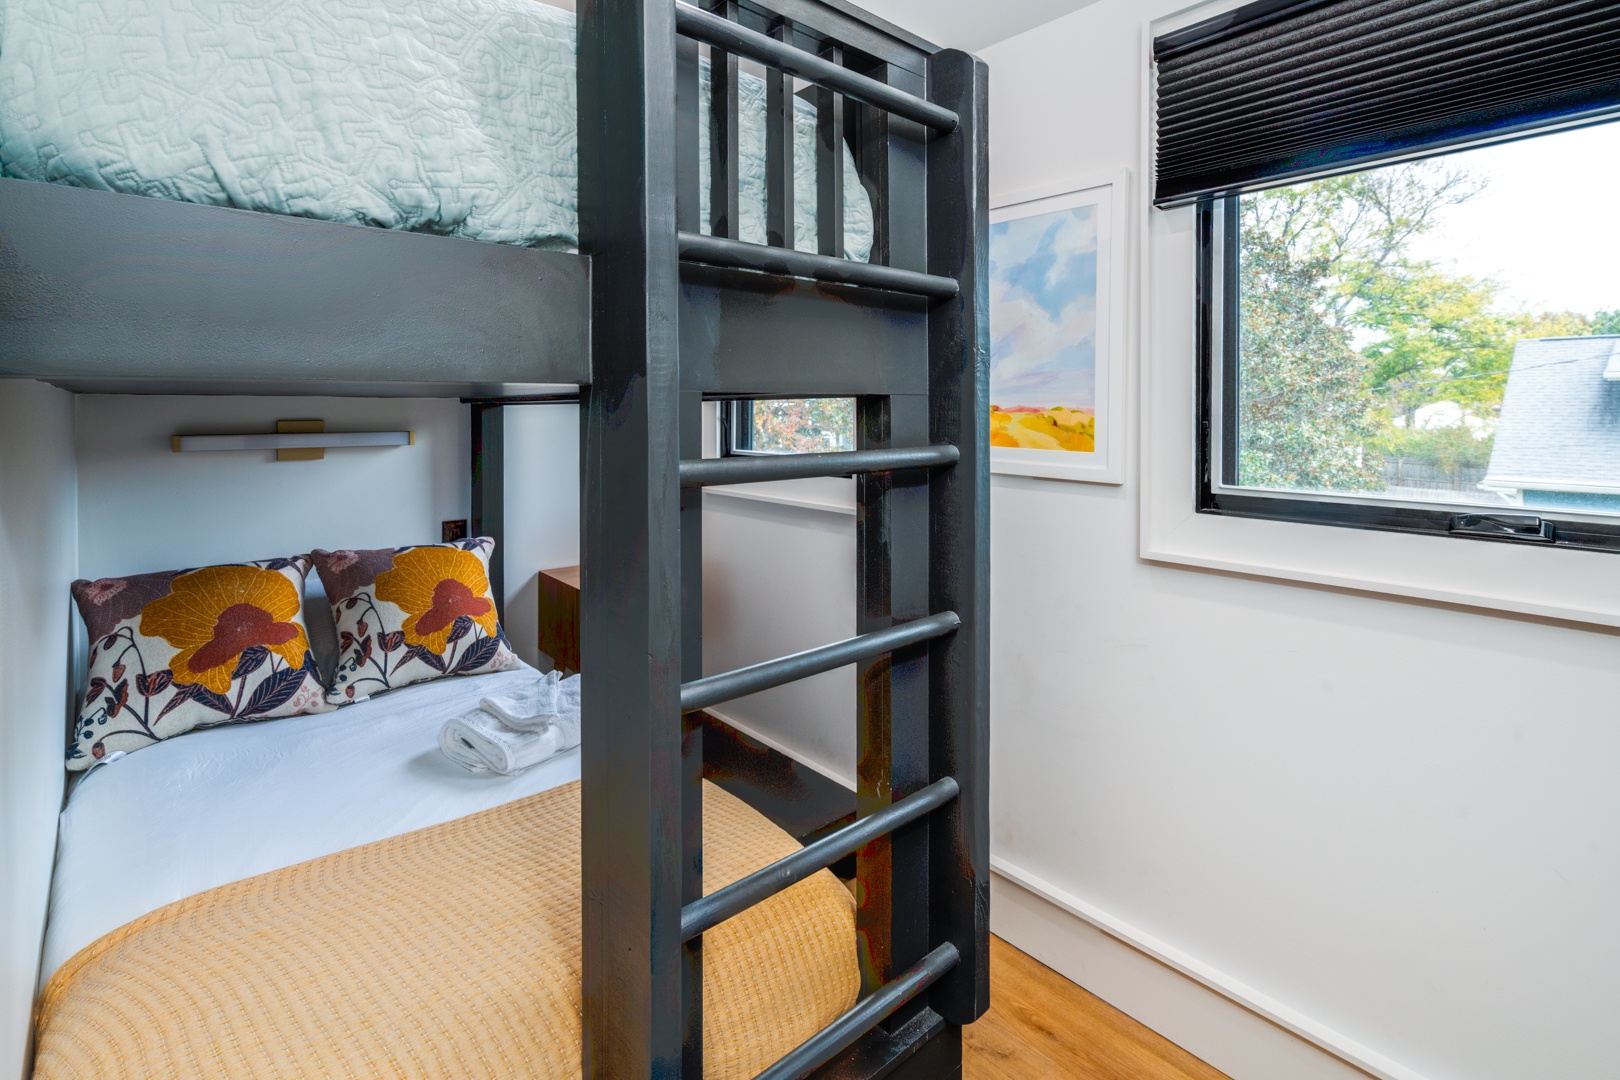 The tranquil loft retreat offers a twin-over-twin bunkbed